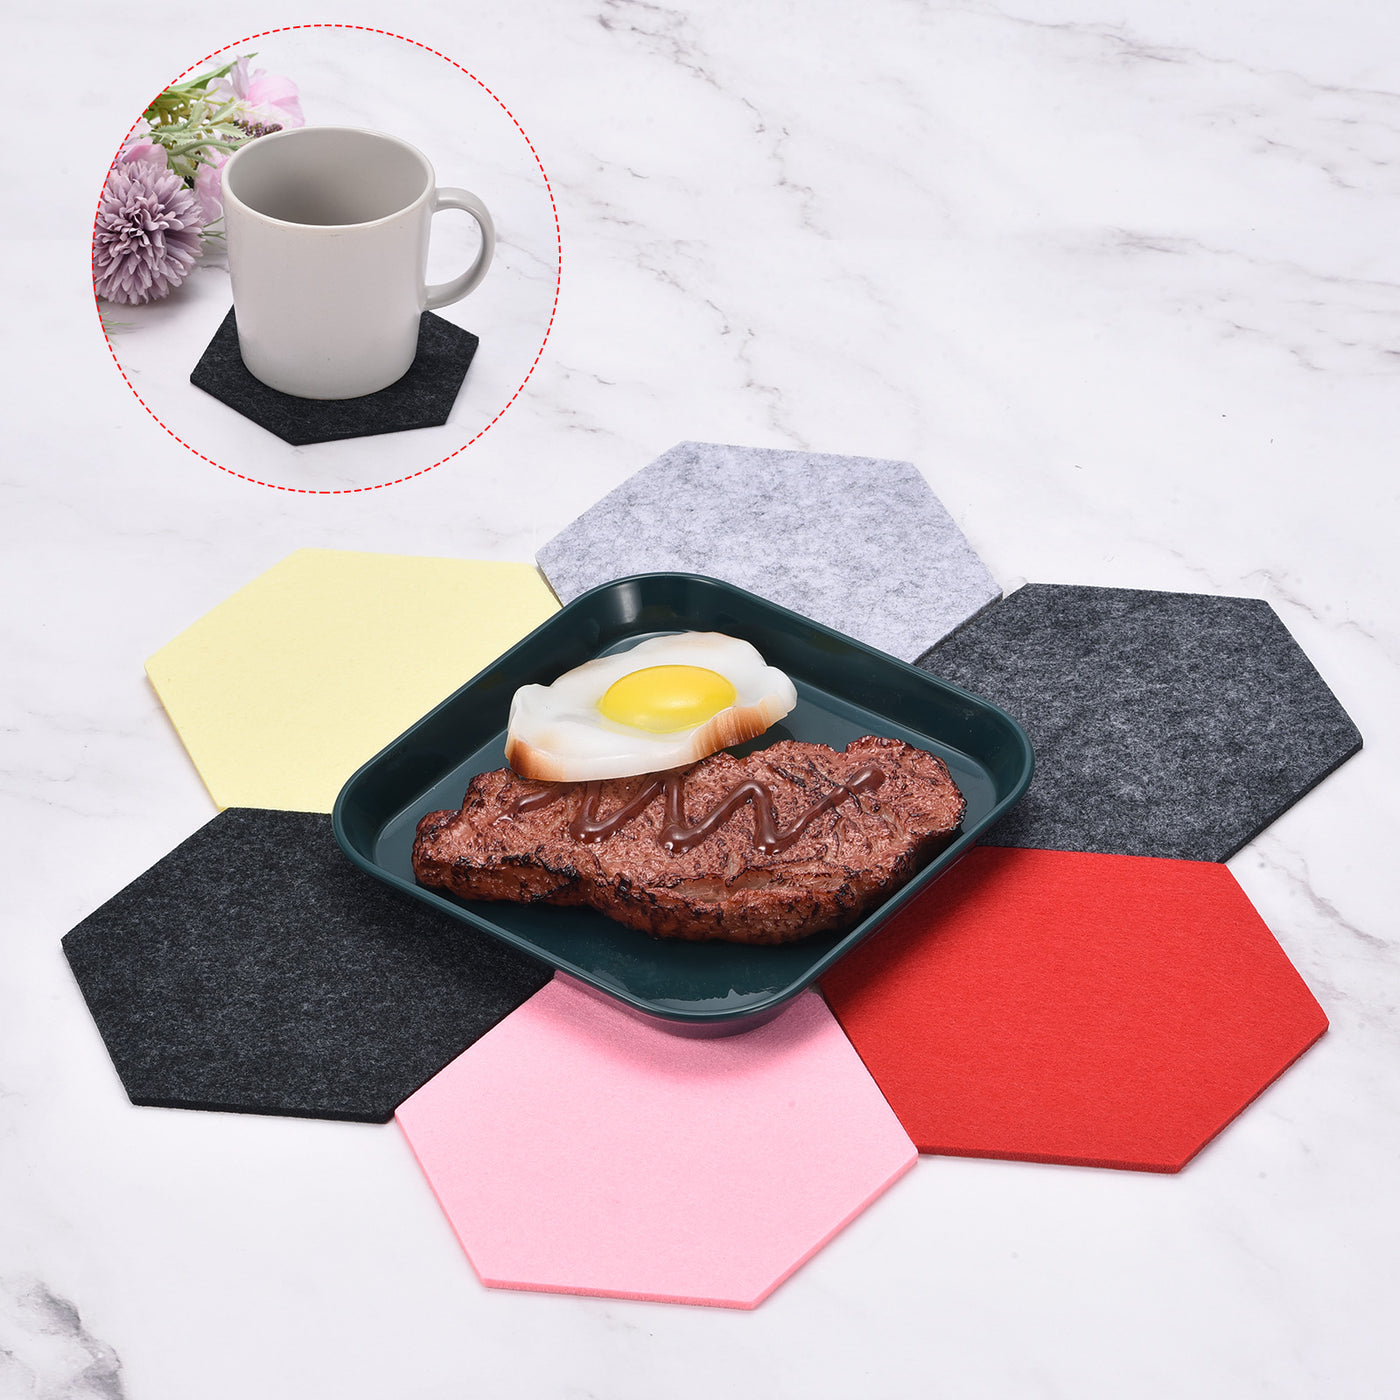 uxcell Uxcell Felt Coasters 9pcs Absorbent Pad Coaster for Drink Cup Pot Bowl Vase Coffee